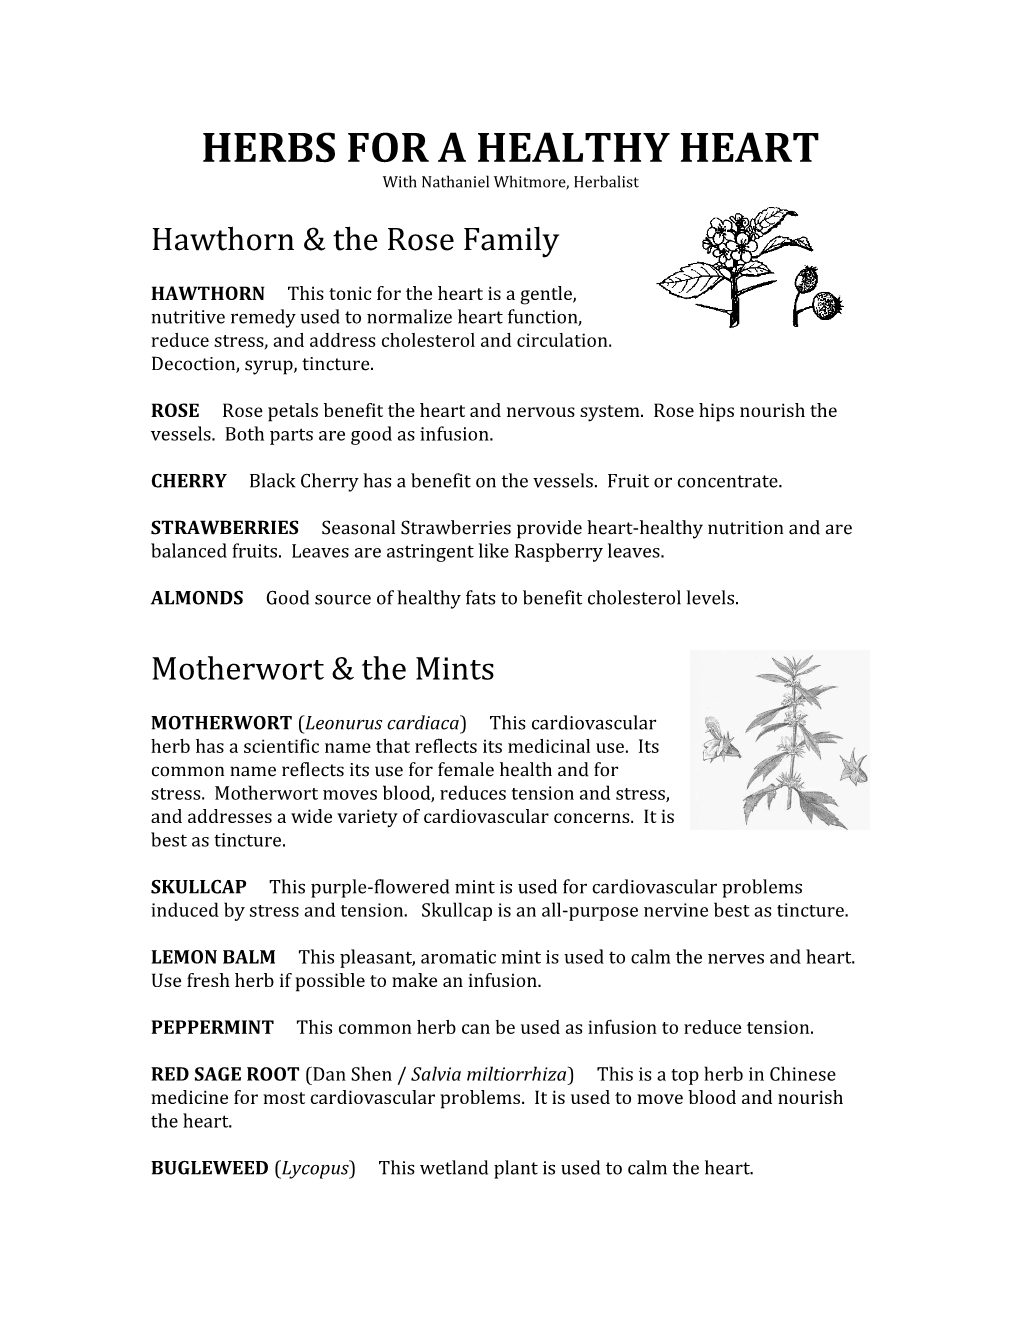 Herbs for a Healthy Heart